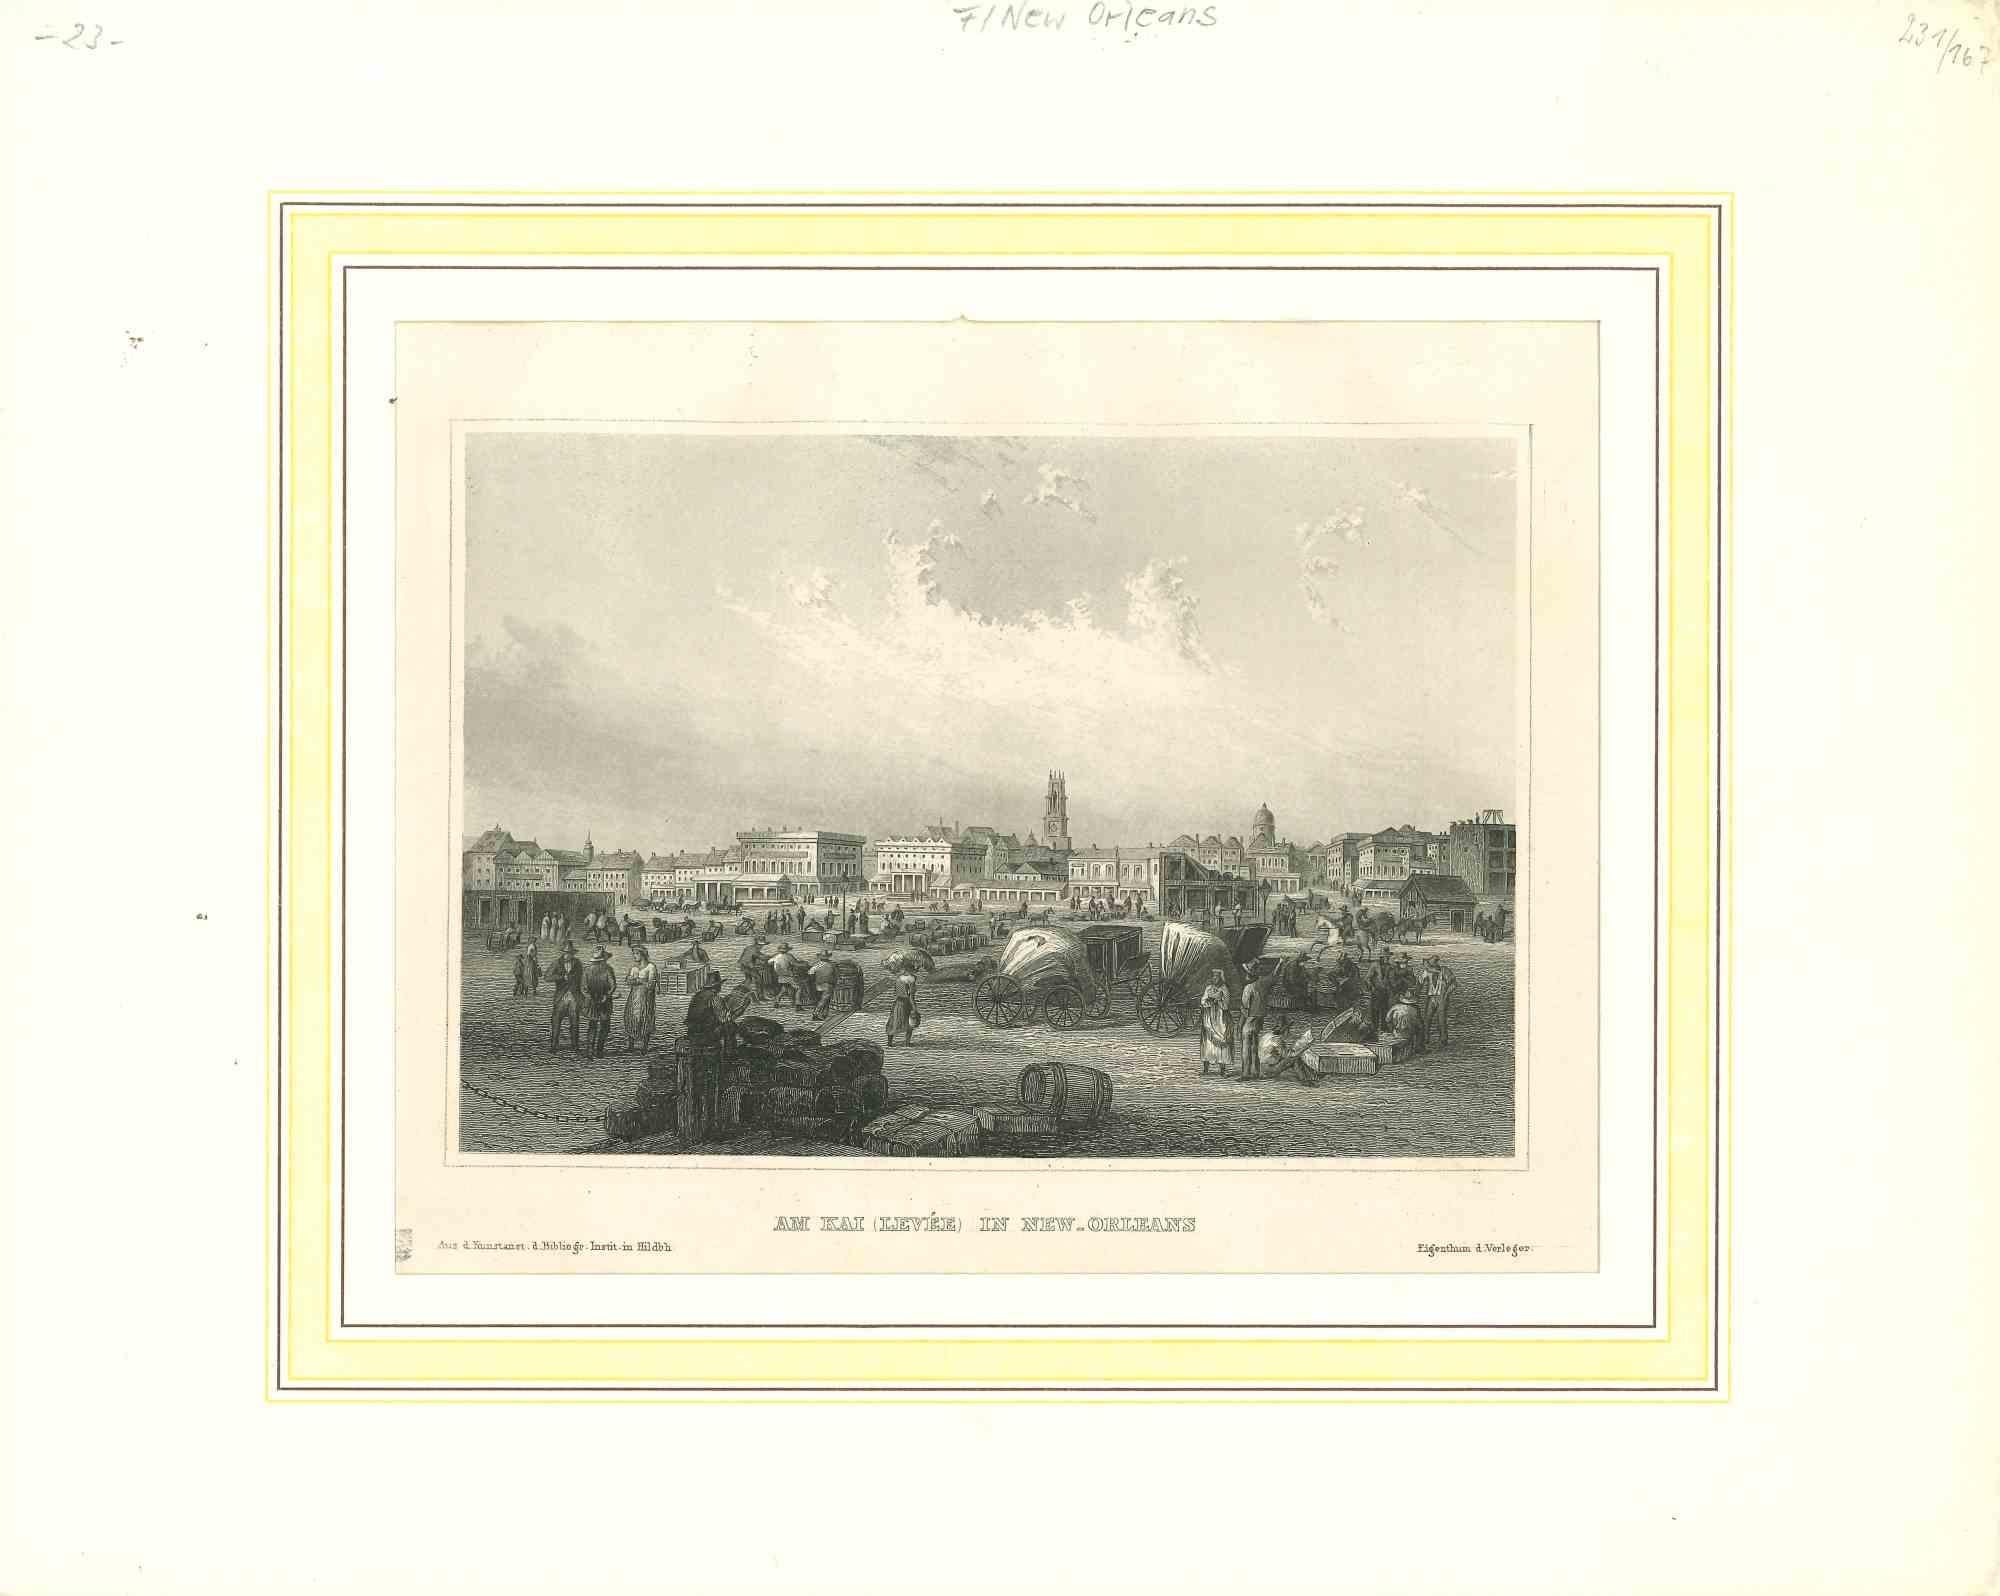 Unknown Landscape Print - Am Kai in New Orleans - Lithograph - Mid-19th Century